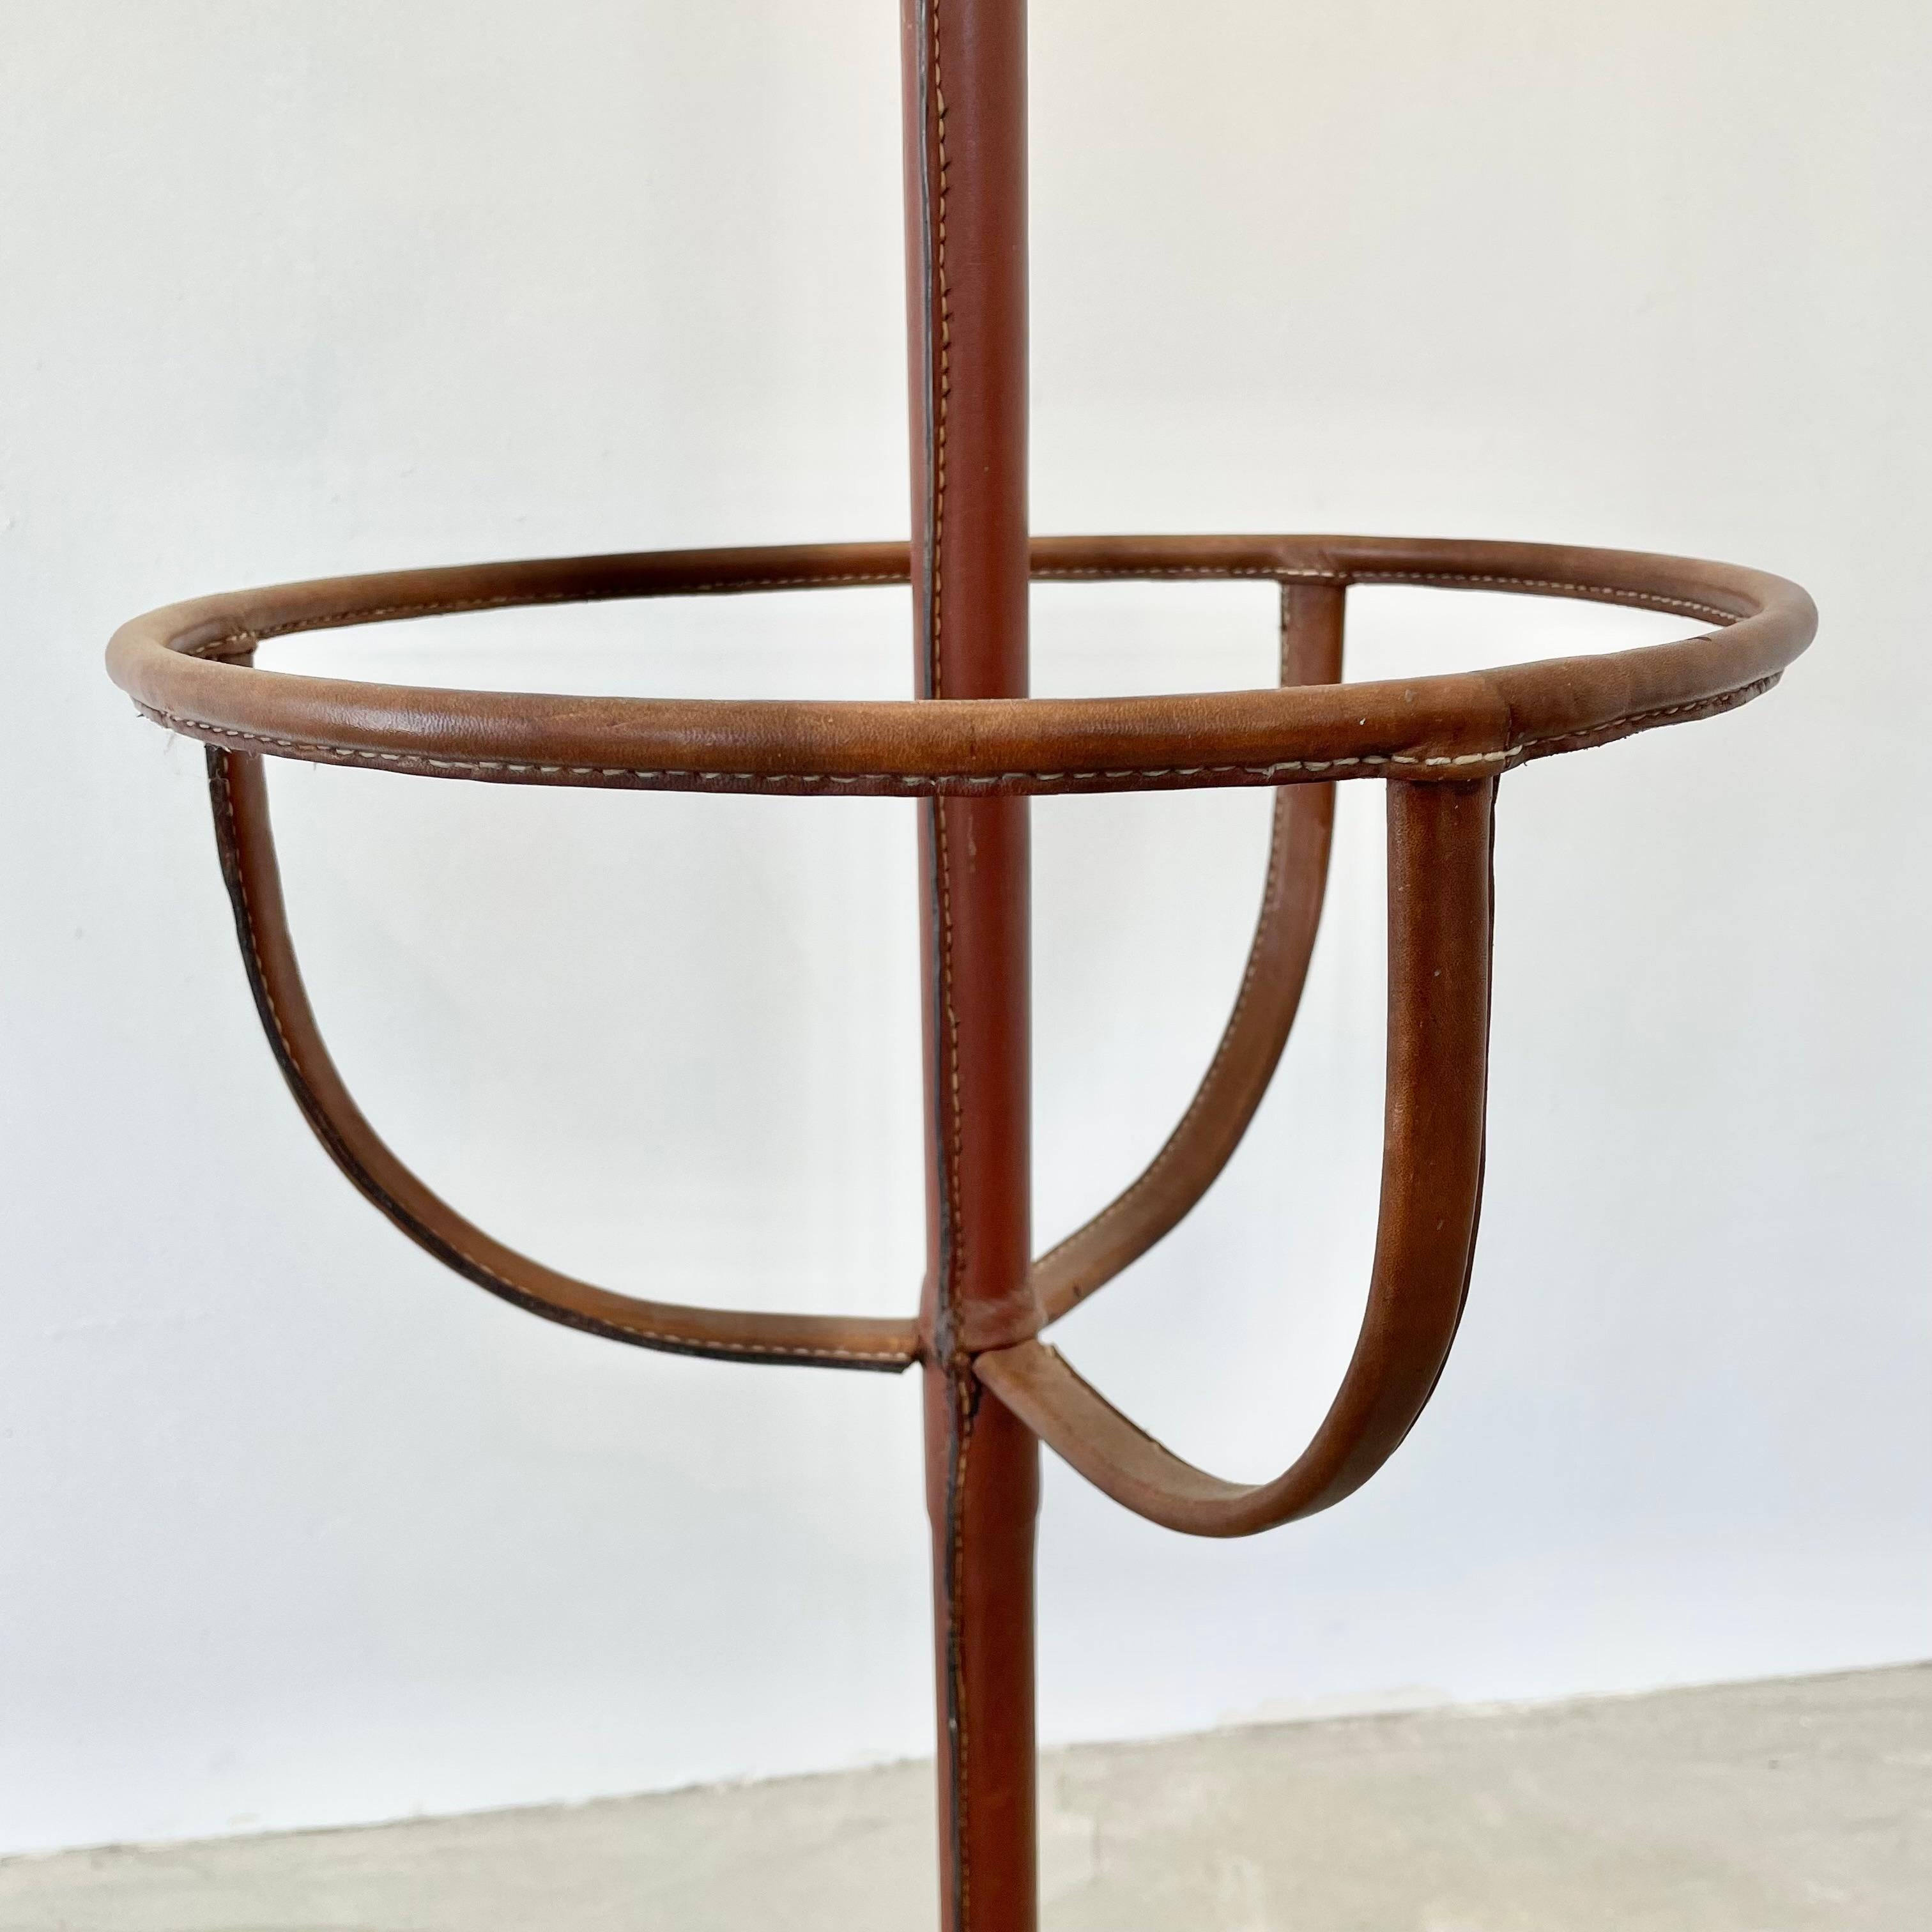 Mid-20th Century Jacques Adnet Floor Lamp in Saddle Leather, 1950s France For Sale